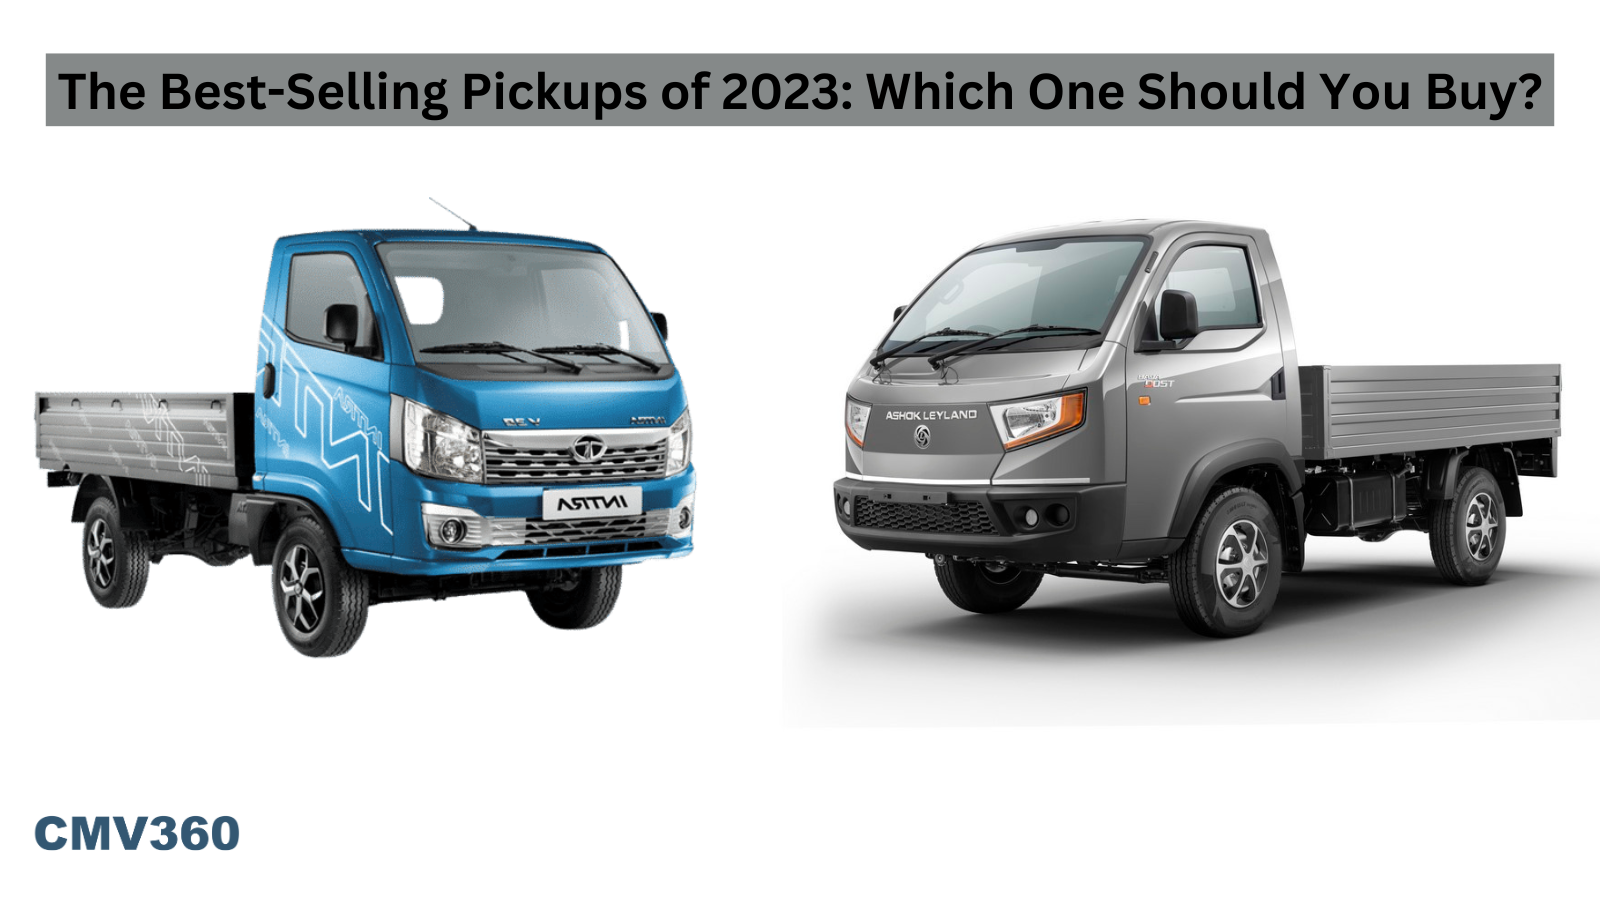 The Best-Selling Pickups of 2023: Which One Should You Buy?